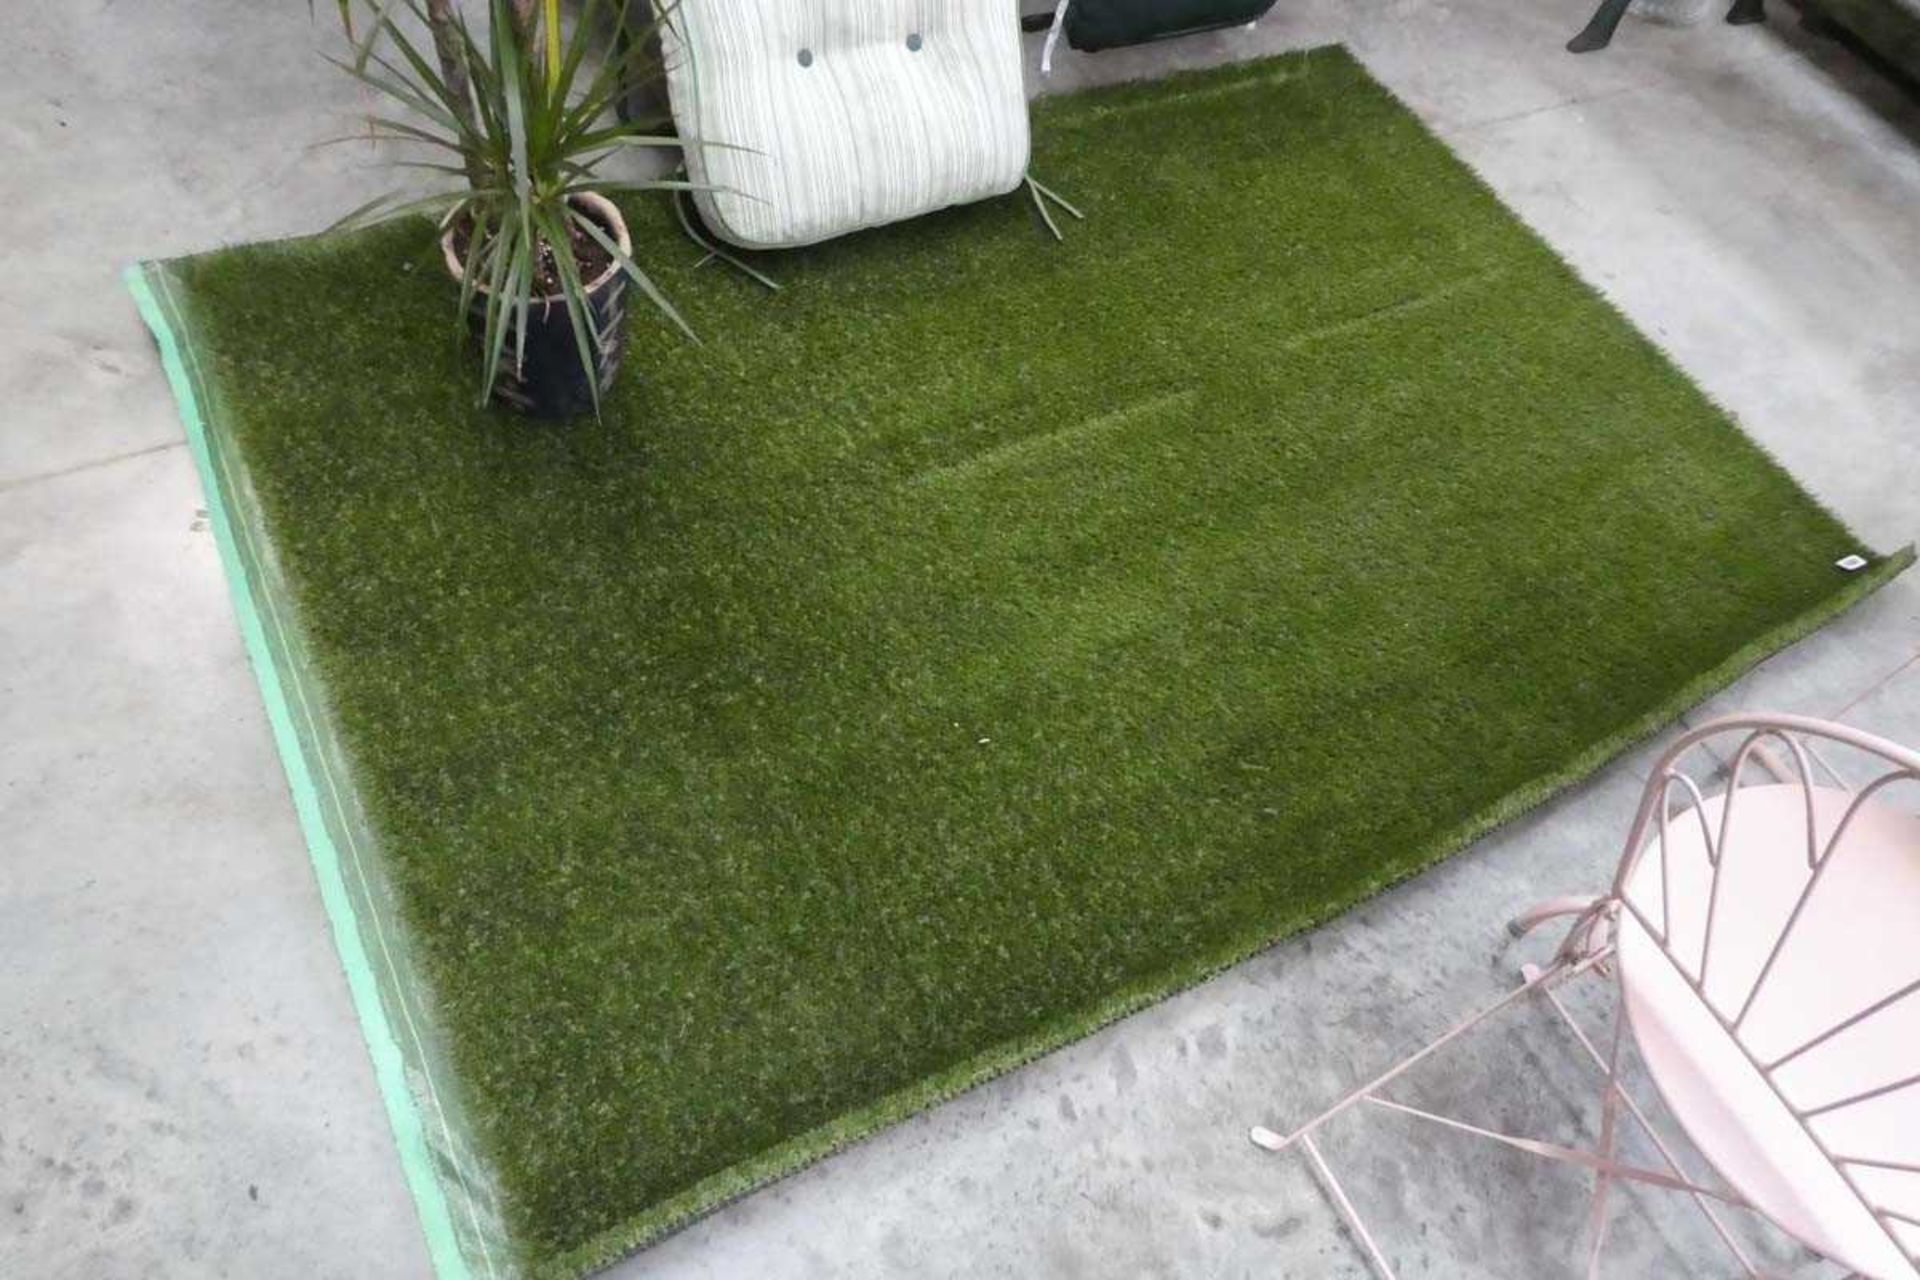 Section of artificial grass